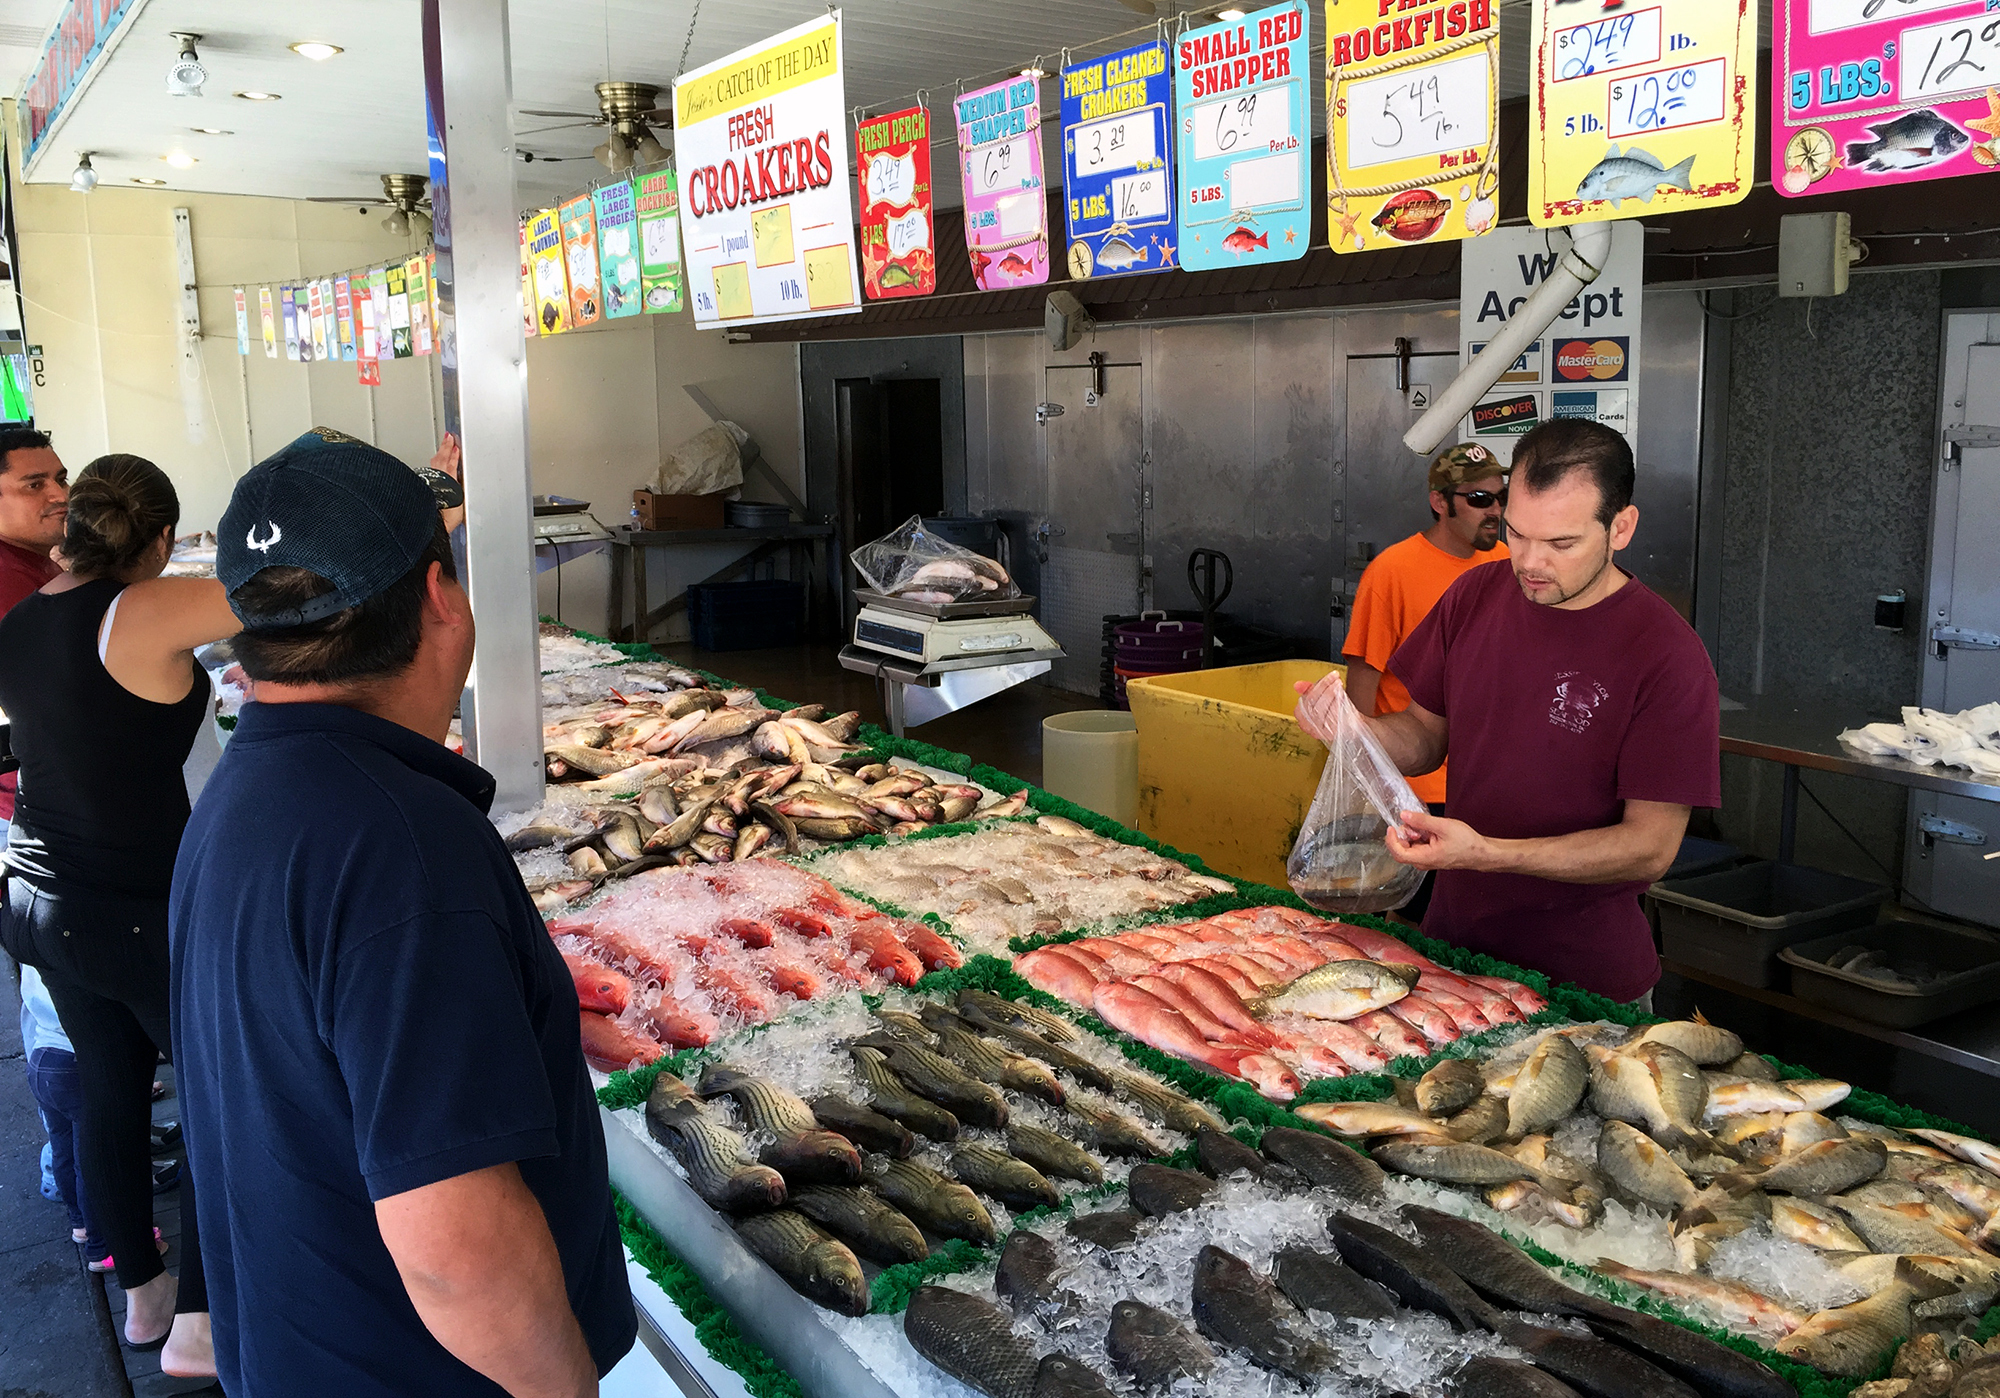 Customers shop for salmon at a fish market in southwest Washington, D.C. Most Americans don't eat the recommended amount of fish each week.